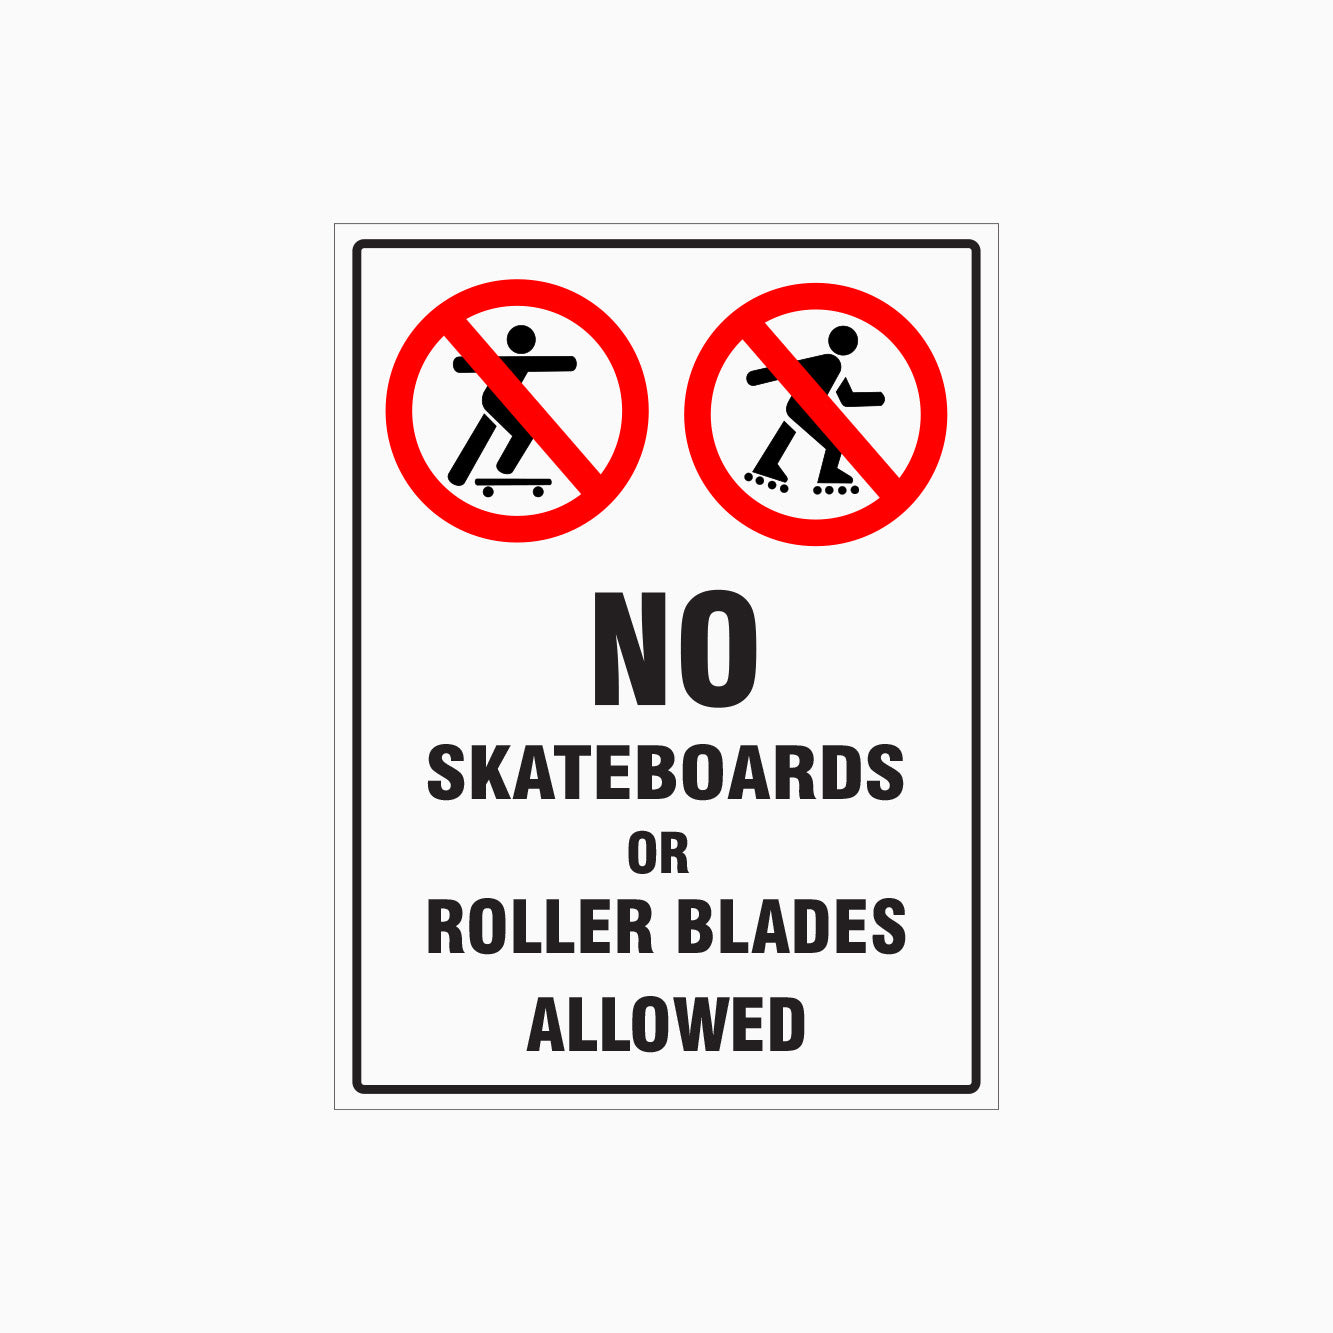 NO SKATEBOARDS OR ROLLER BLADES ALLOWED SIGN - PROHIBITION SIGNS